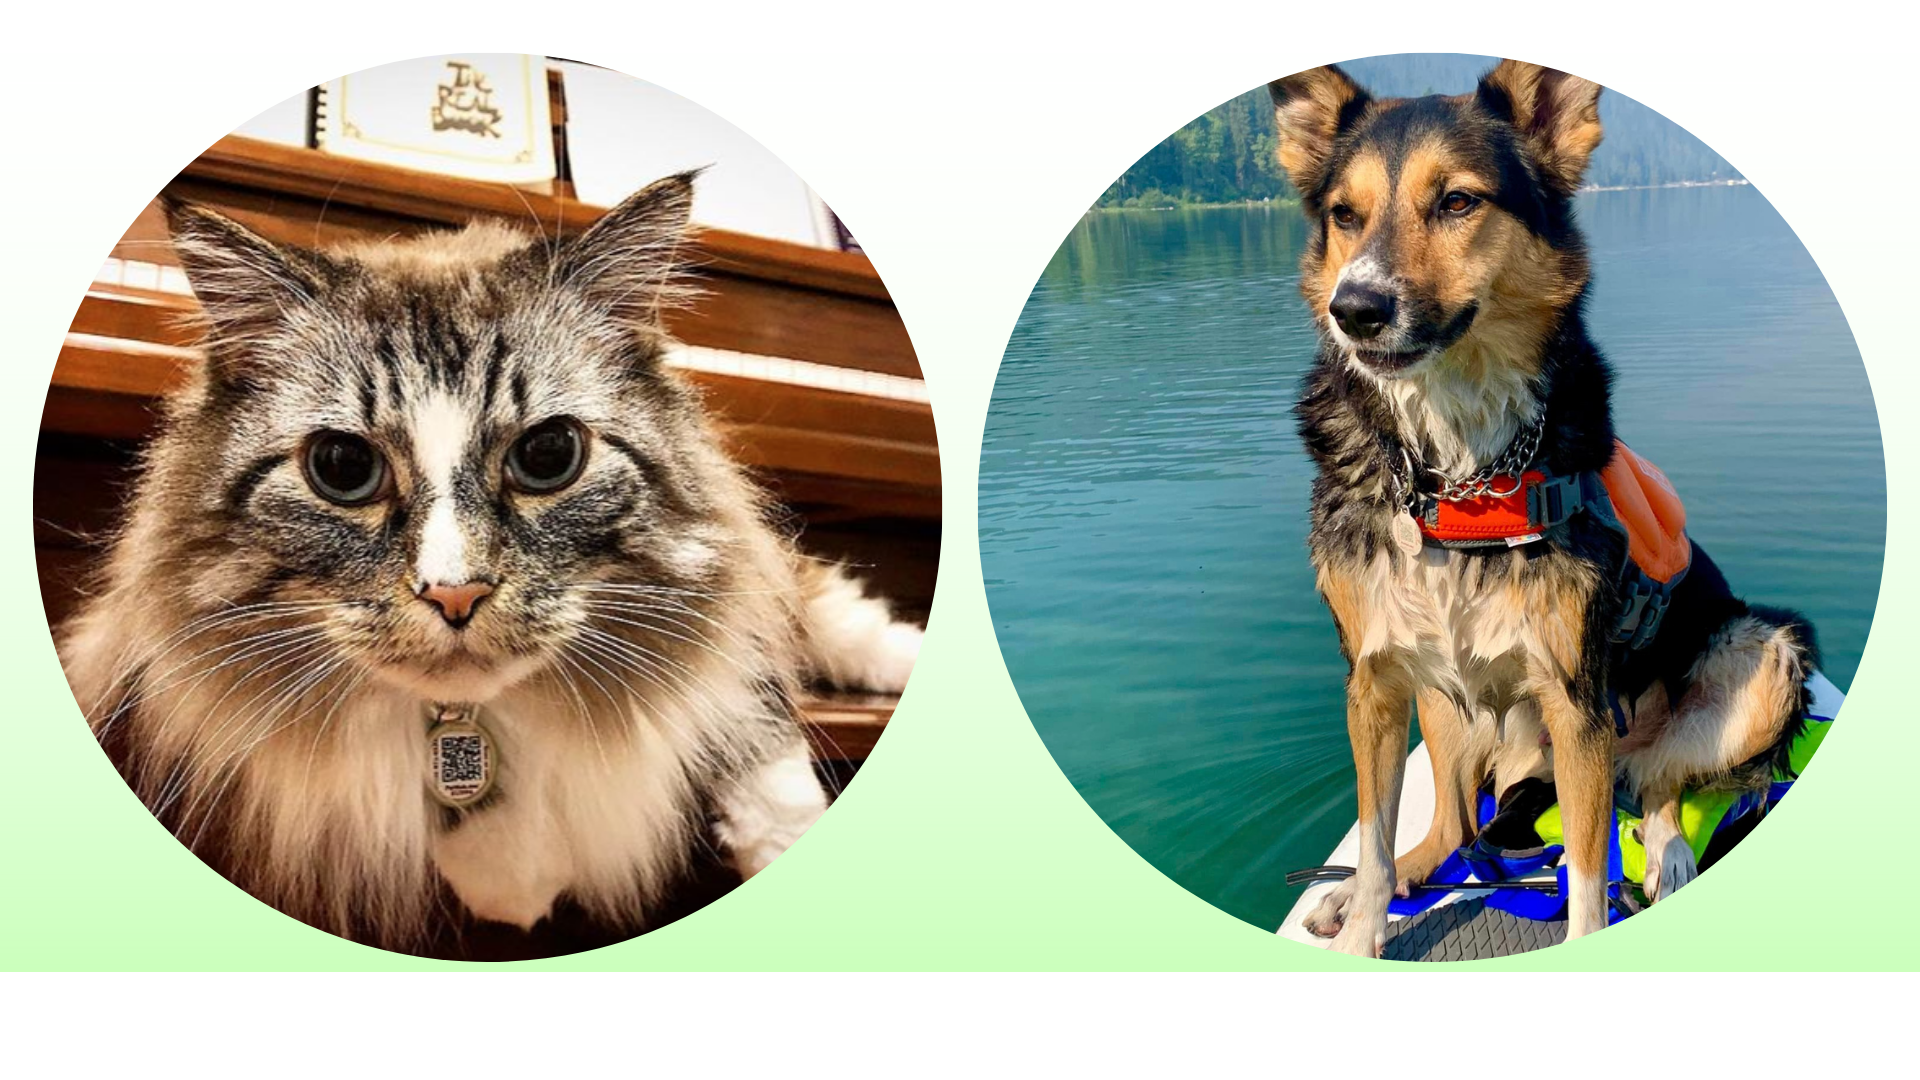 Maine Coon cat and australian shepard in PetHub ID Tags